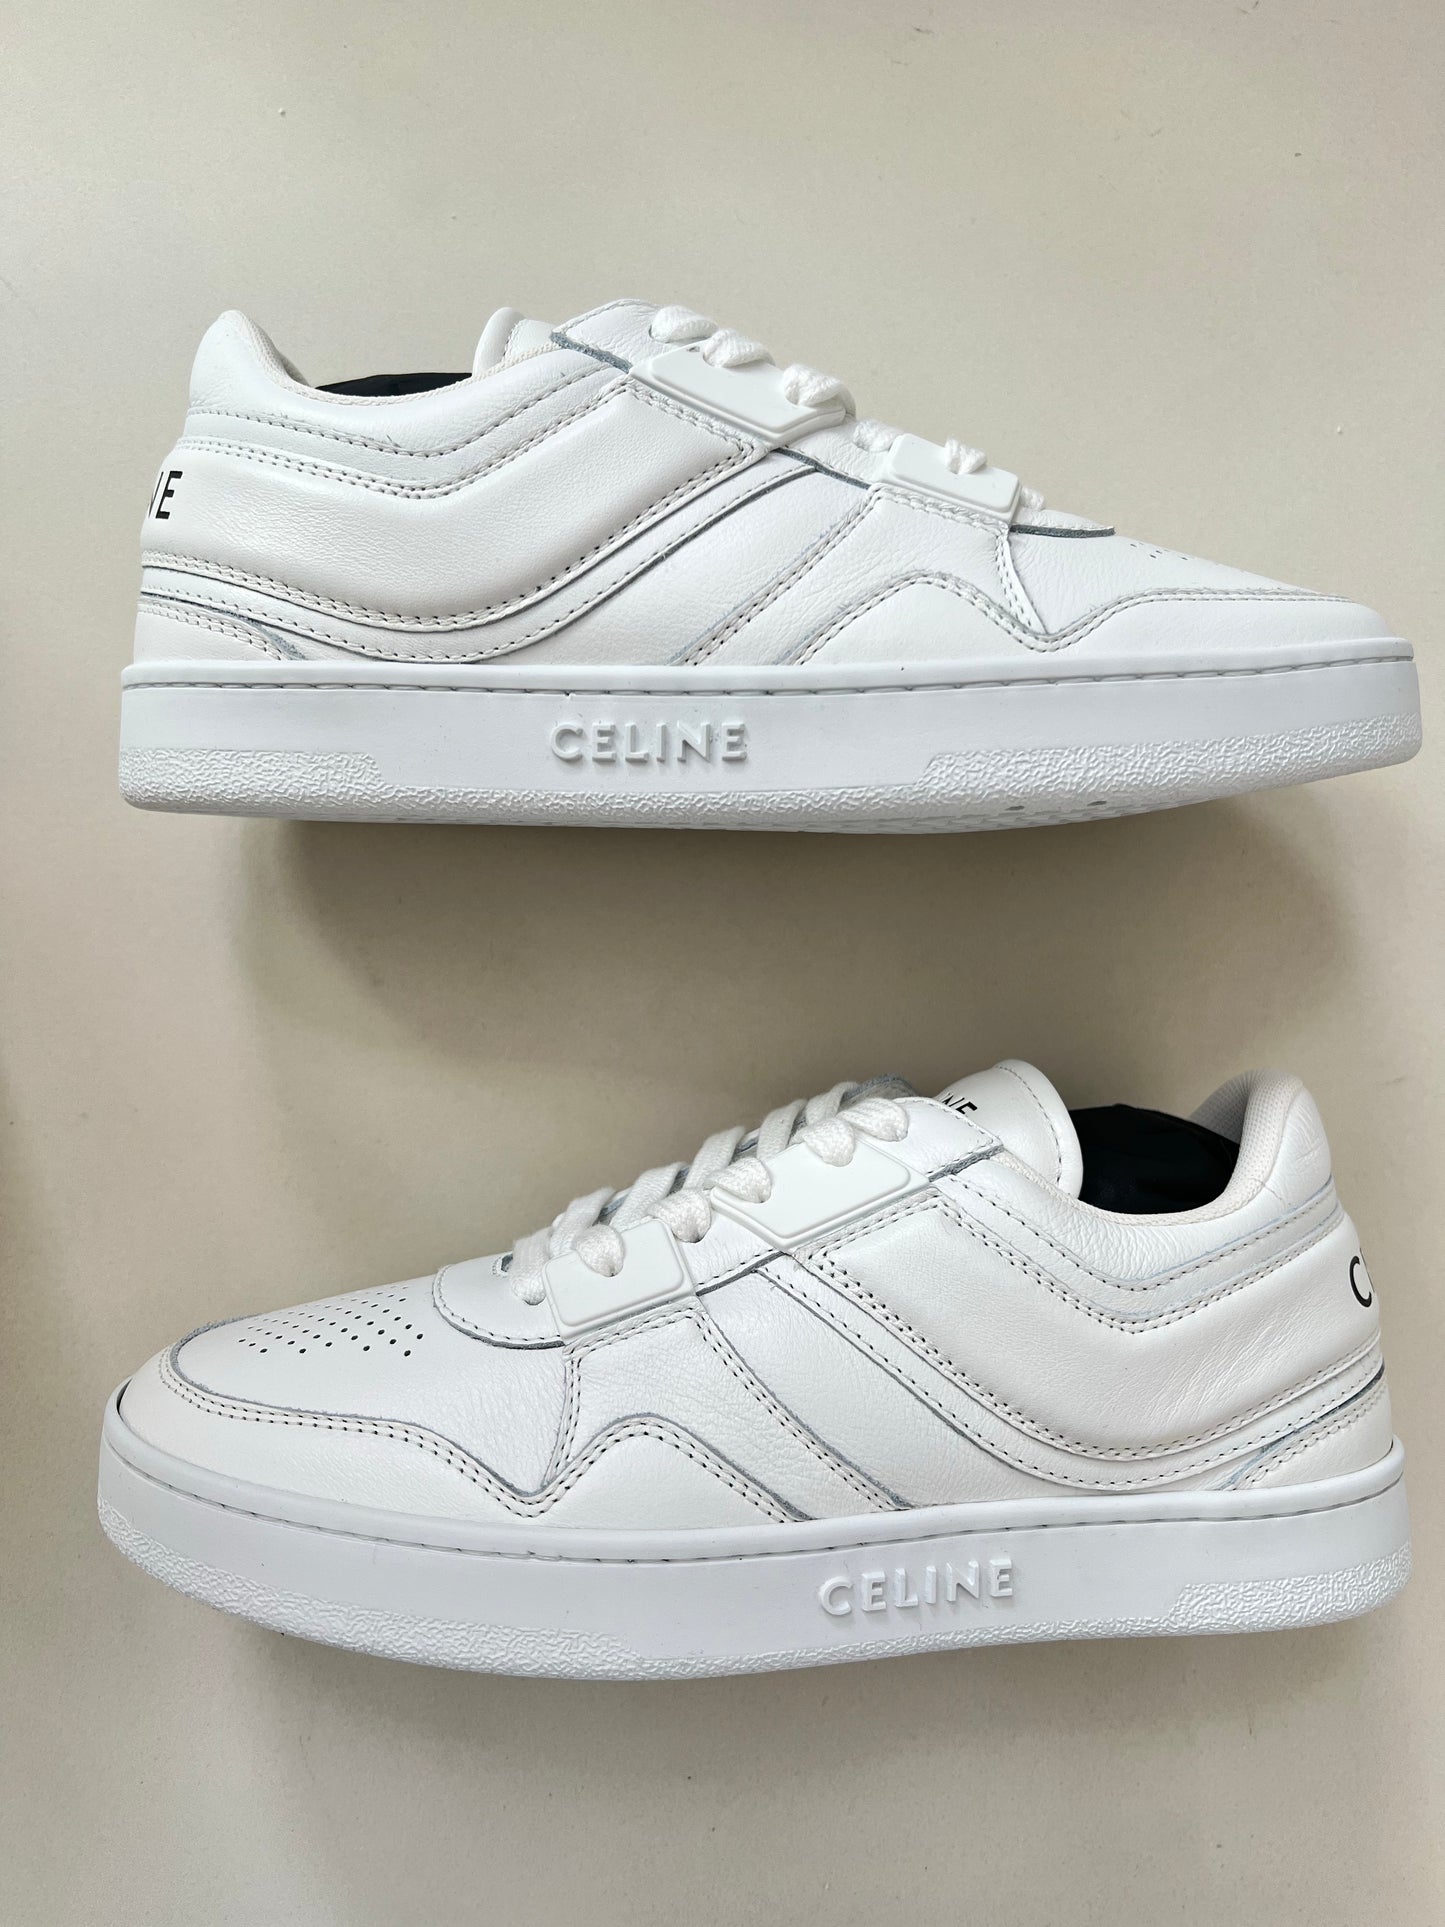 CELINE TRAINER LOW LACE-UP SNEAKER IN CALFSKIN OPTIC WHITE